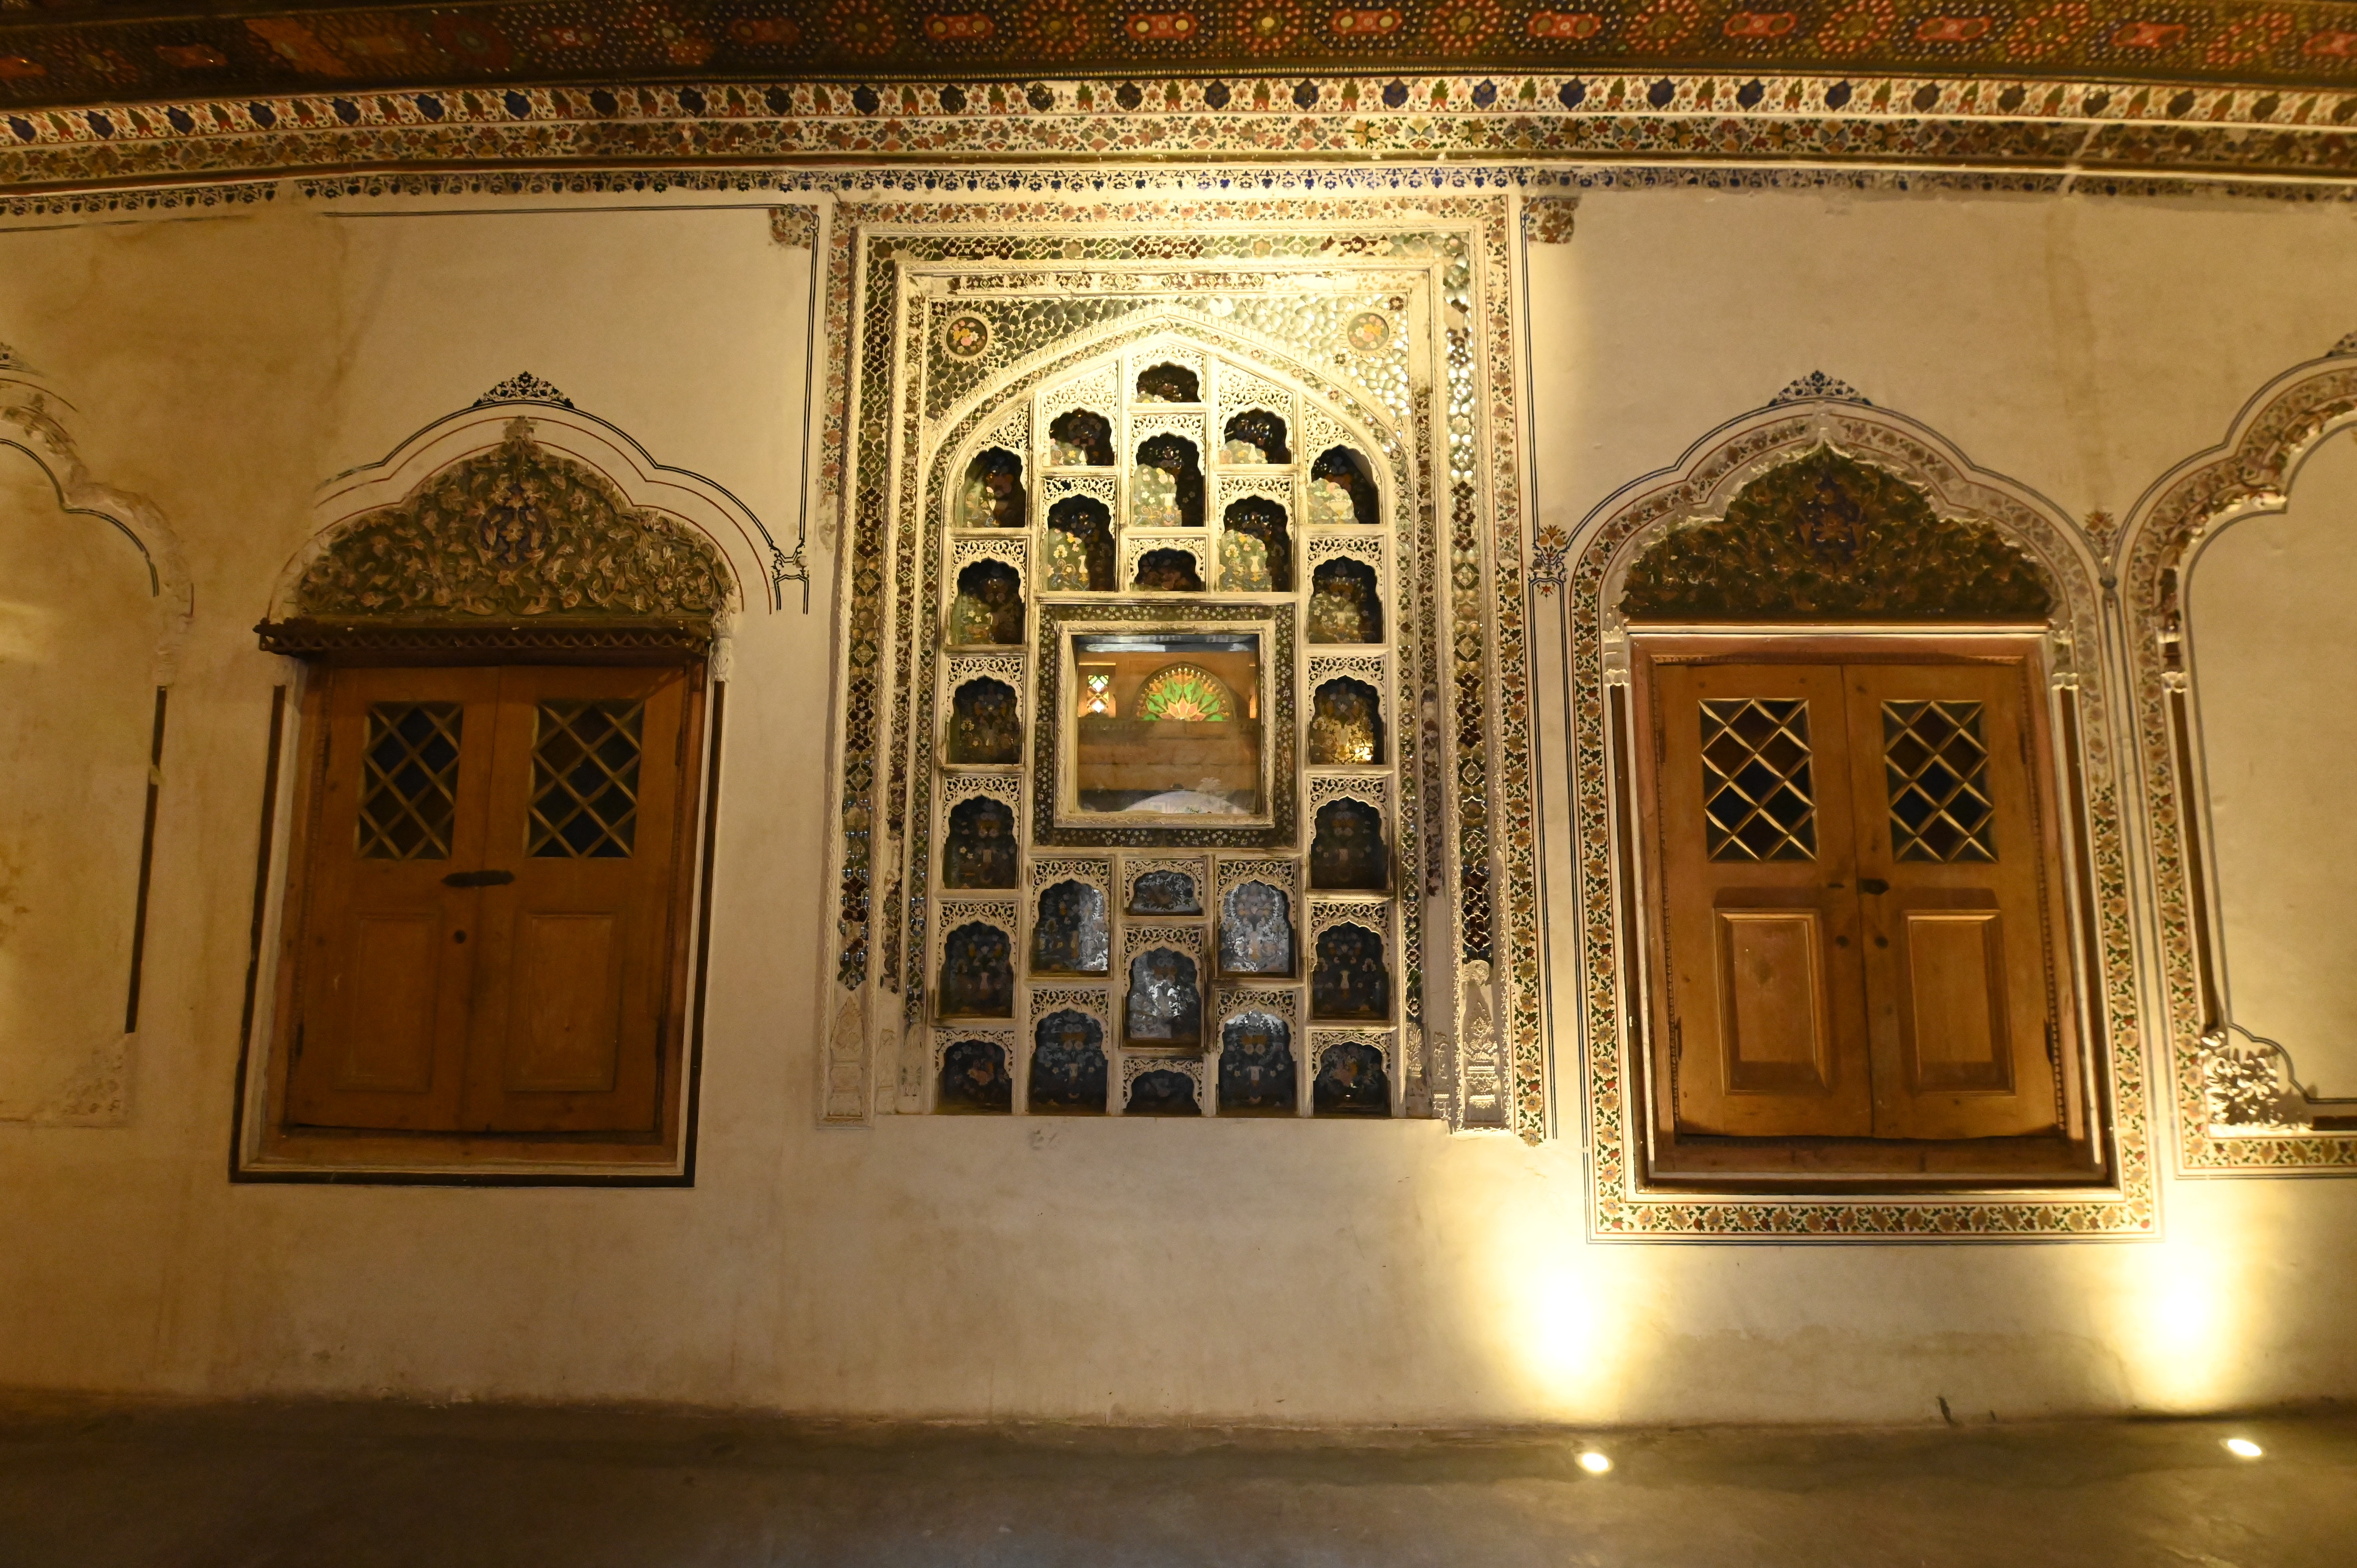 The beautiful interior view of a house located in Sethi Mohalla